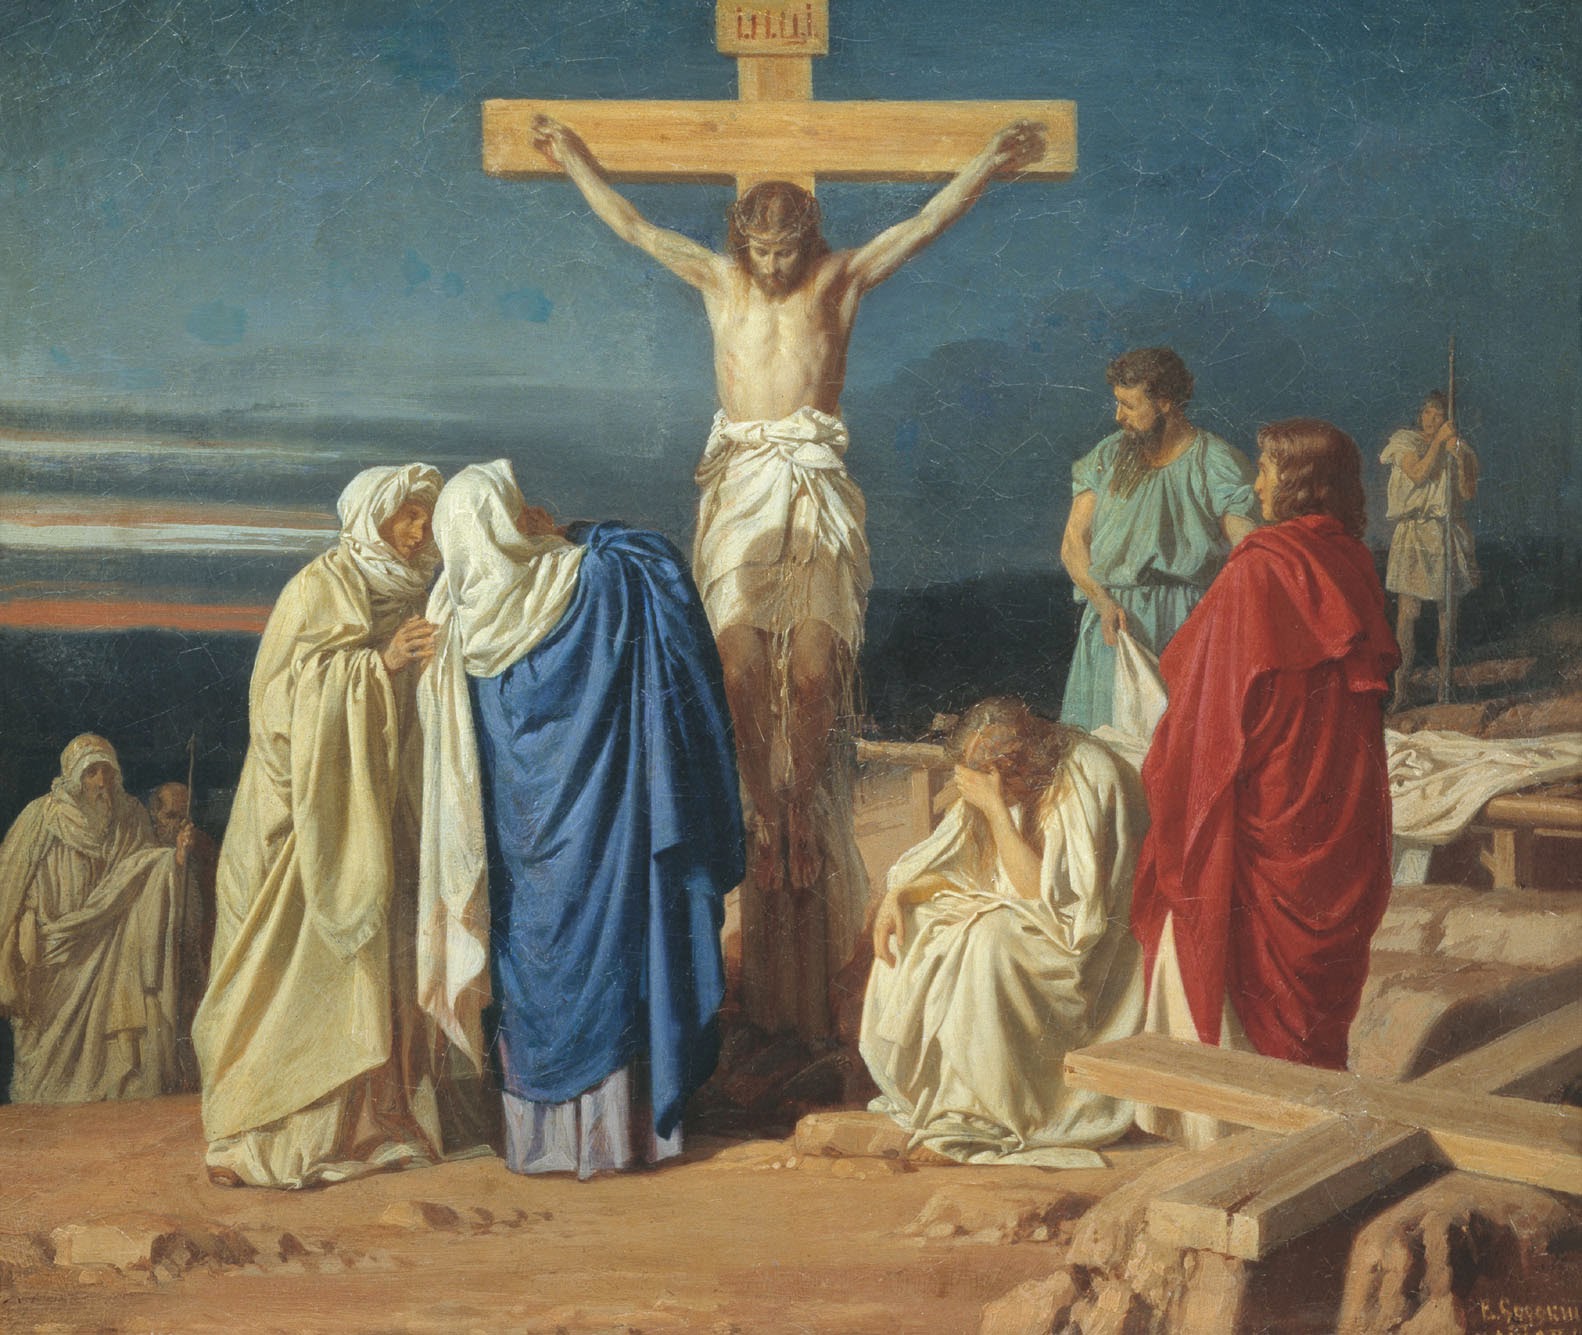 This Present Time: Friday of the Passion of the Lord (Good Friday)